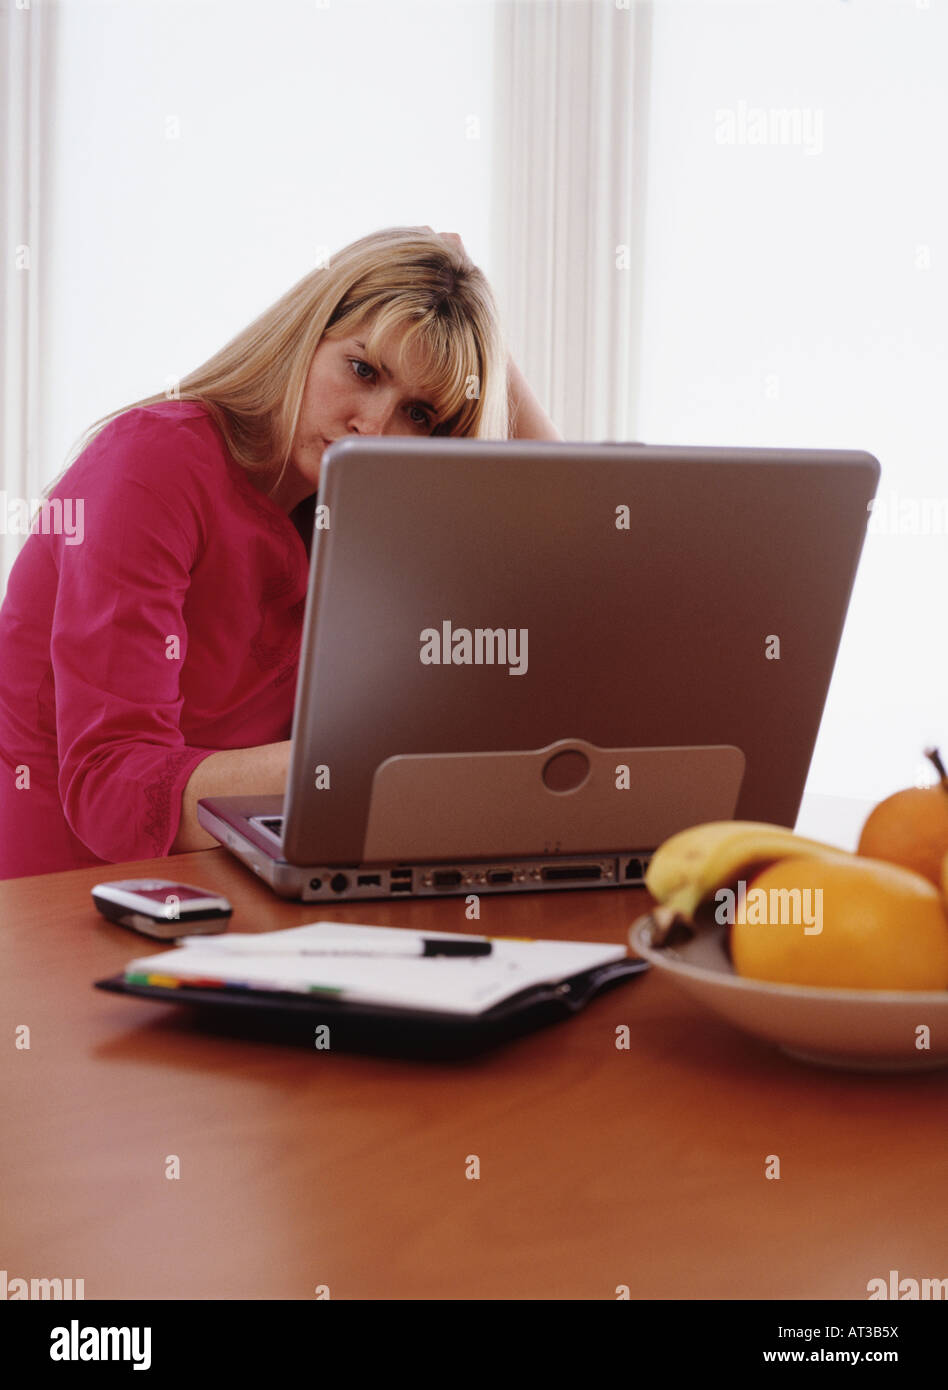 A woman working at home on a laptop Stock Photo